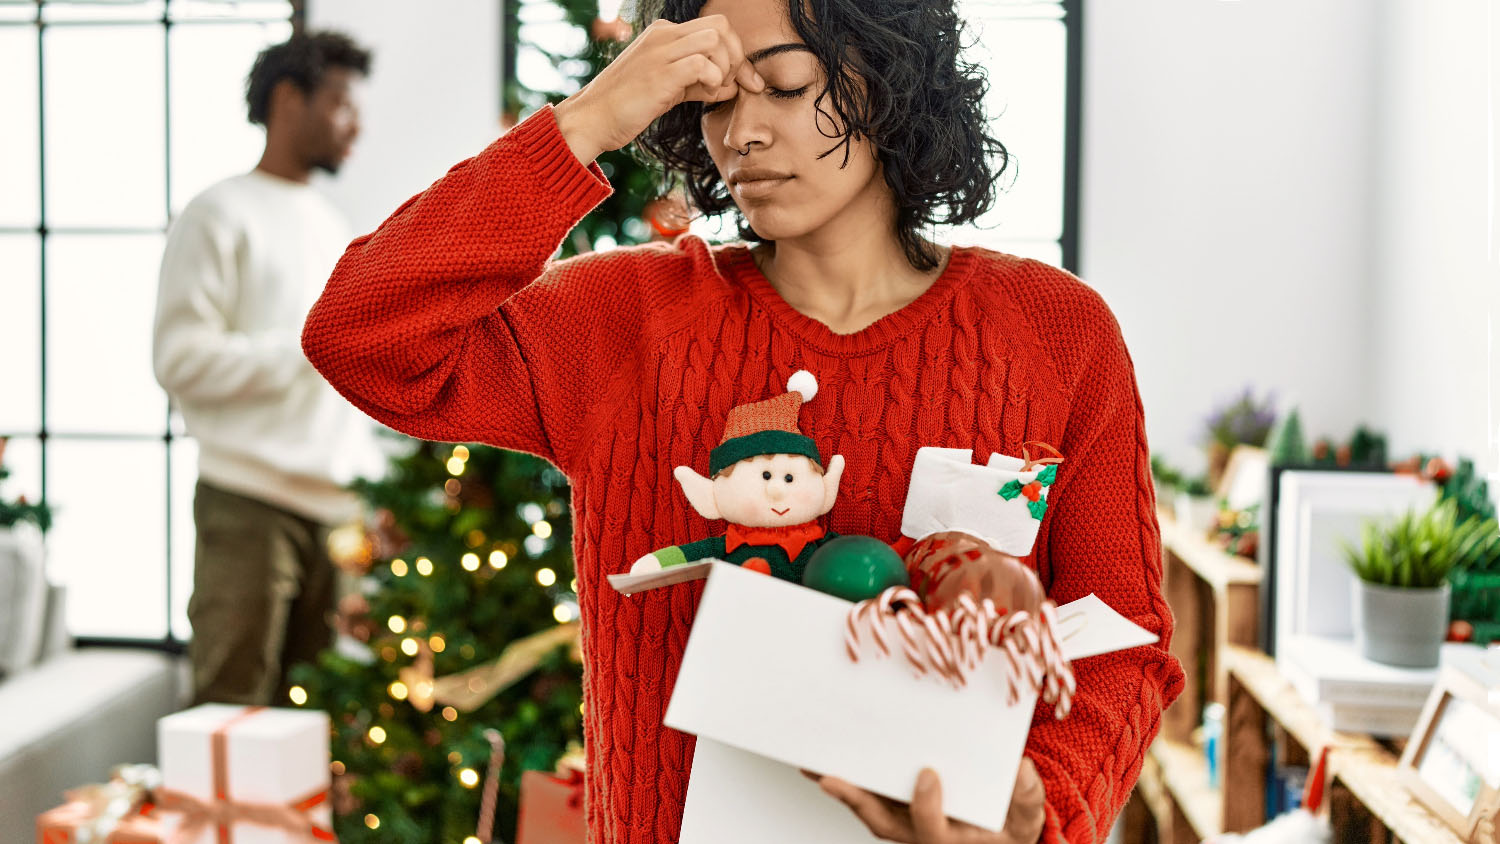 woman wearing a red sweater pinches her eyebrows while a man in the background decorates a christmas tree